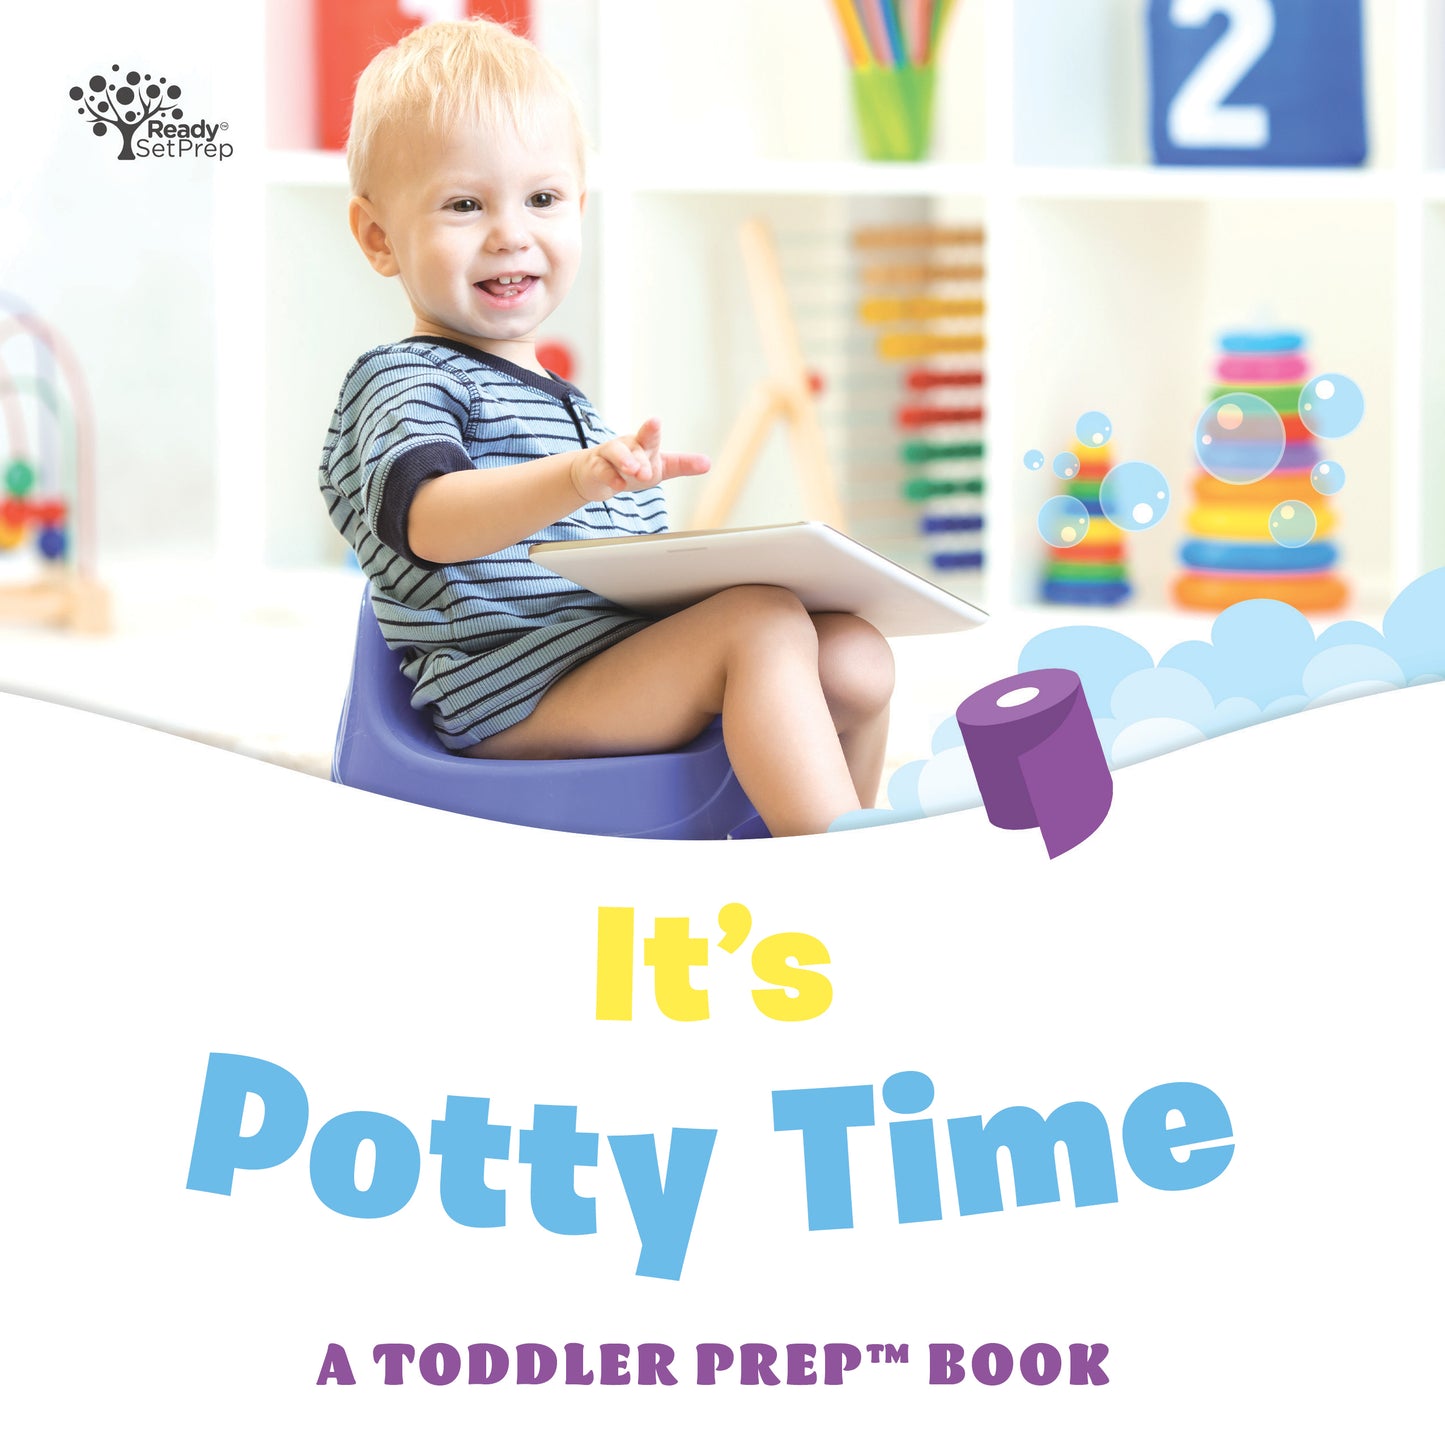 It's Potty Time: A Toddler Prep Book